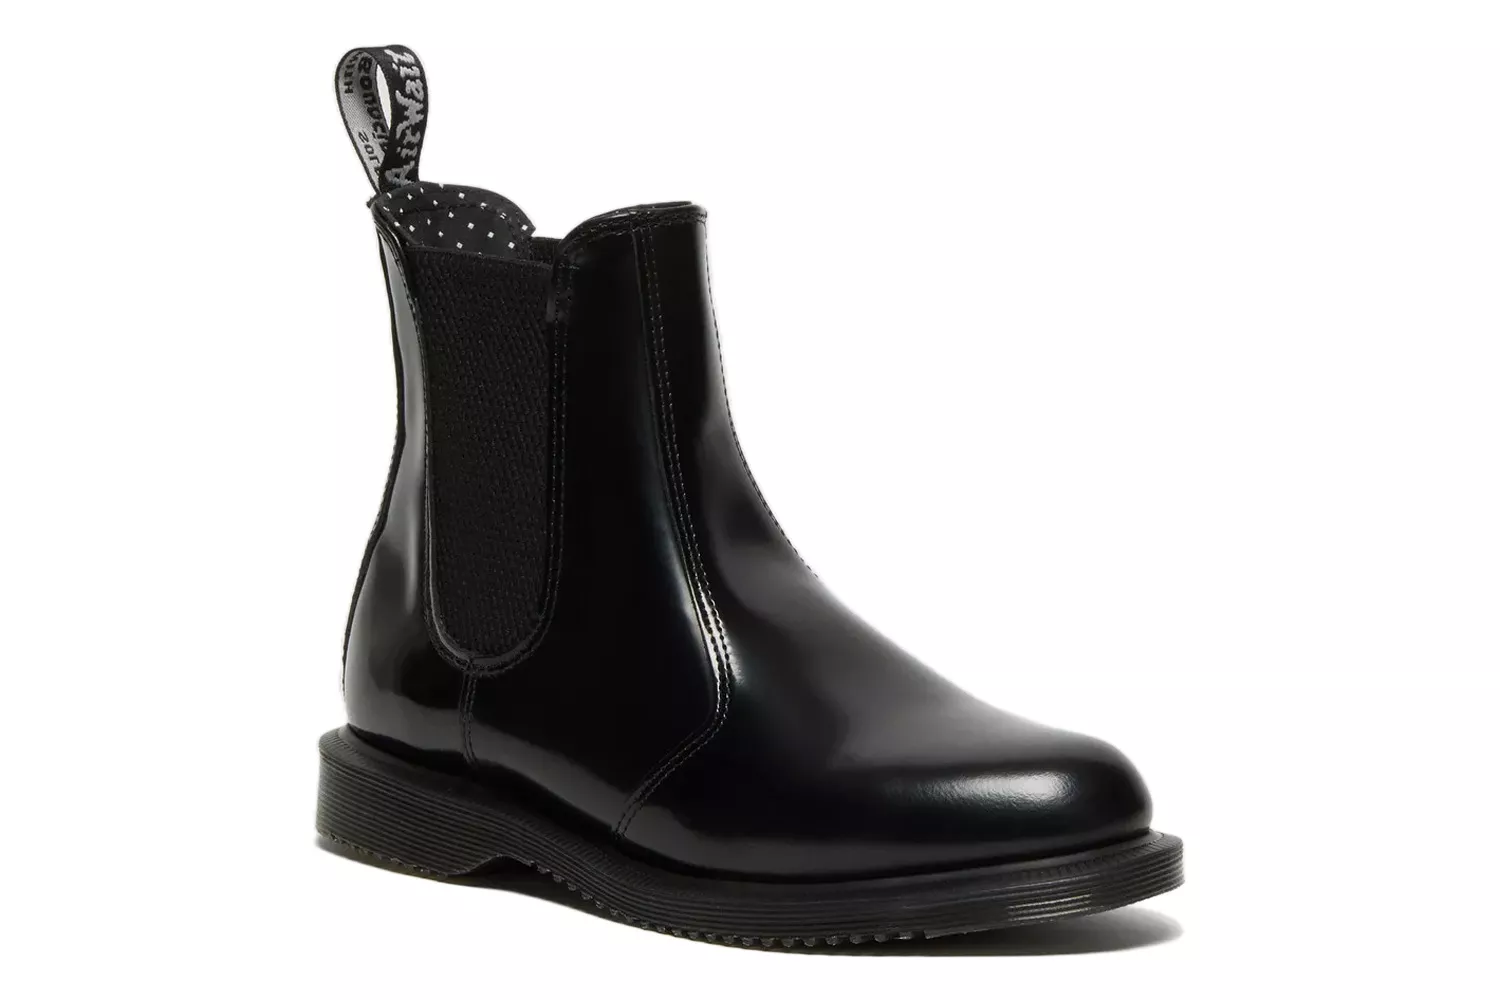 The Most Comfortable Chelsea Boots: Dr. Martens Flora Chelsea Boot